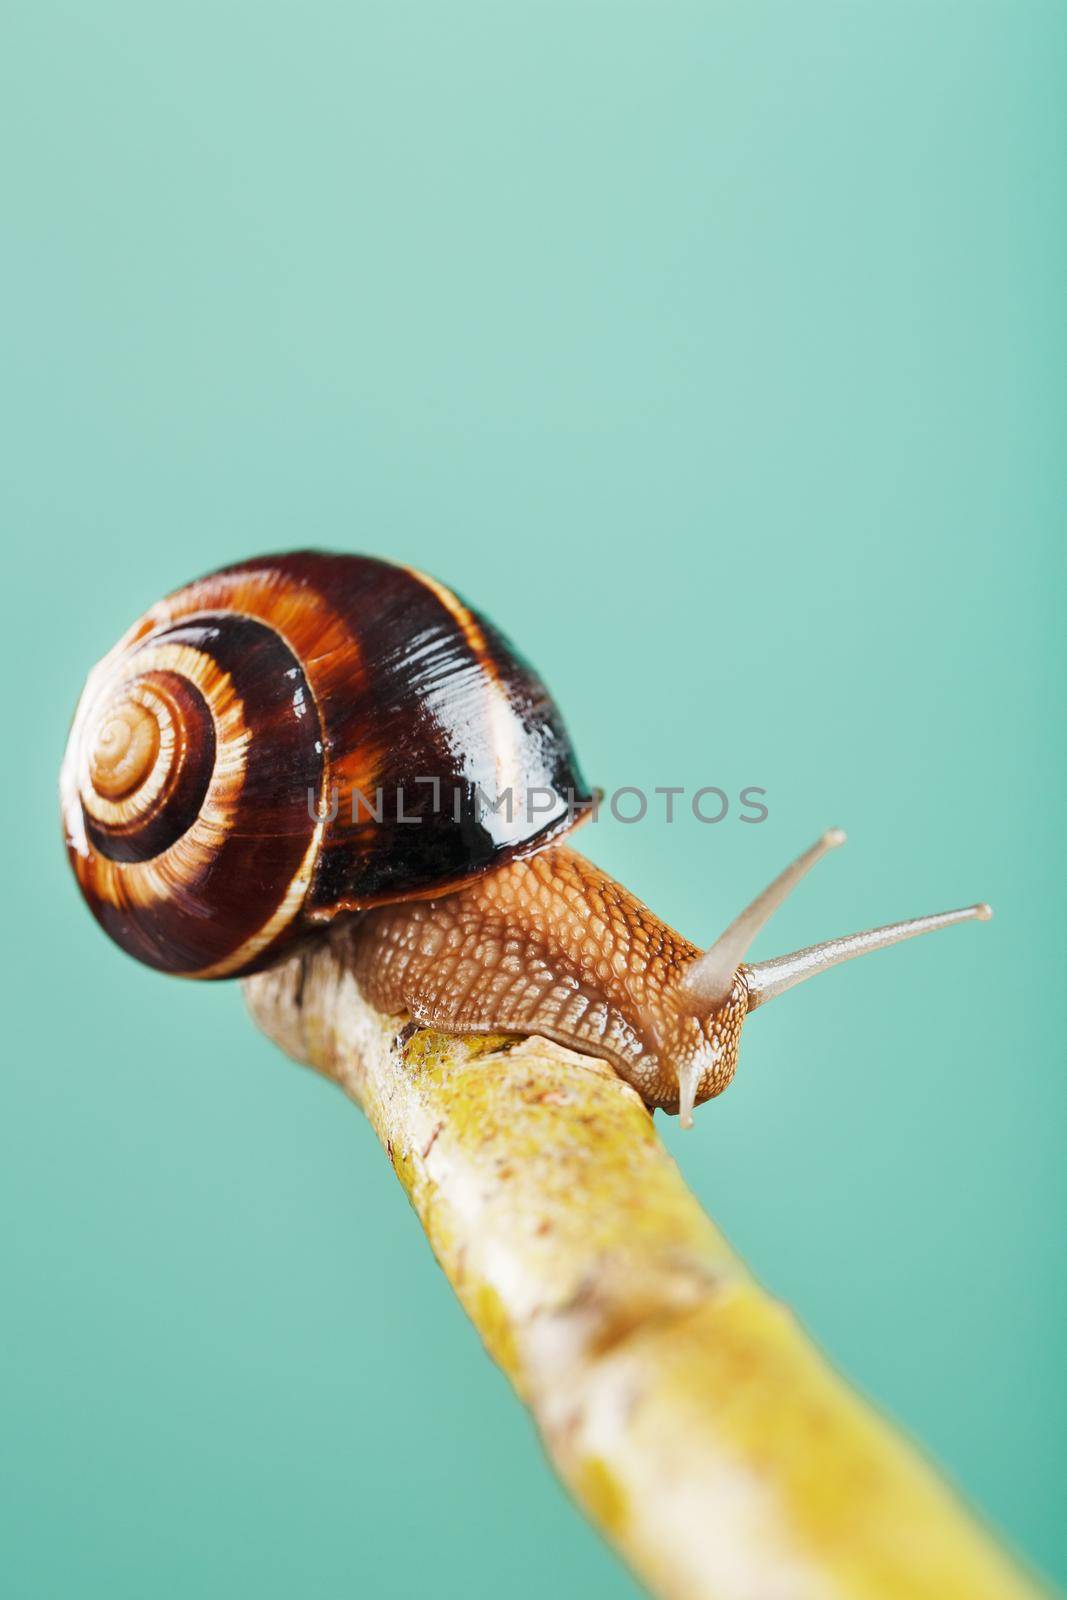 A large snail with horns and a brown shell crawls along a branch on a green background. The concept of overcoming complexity